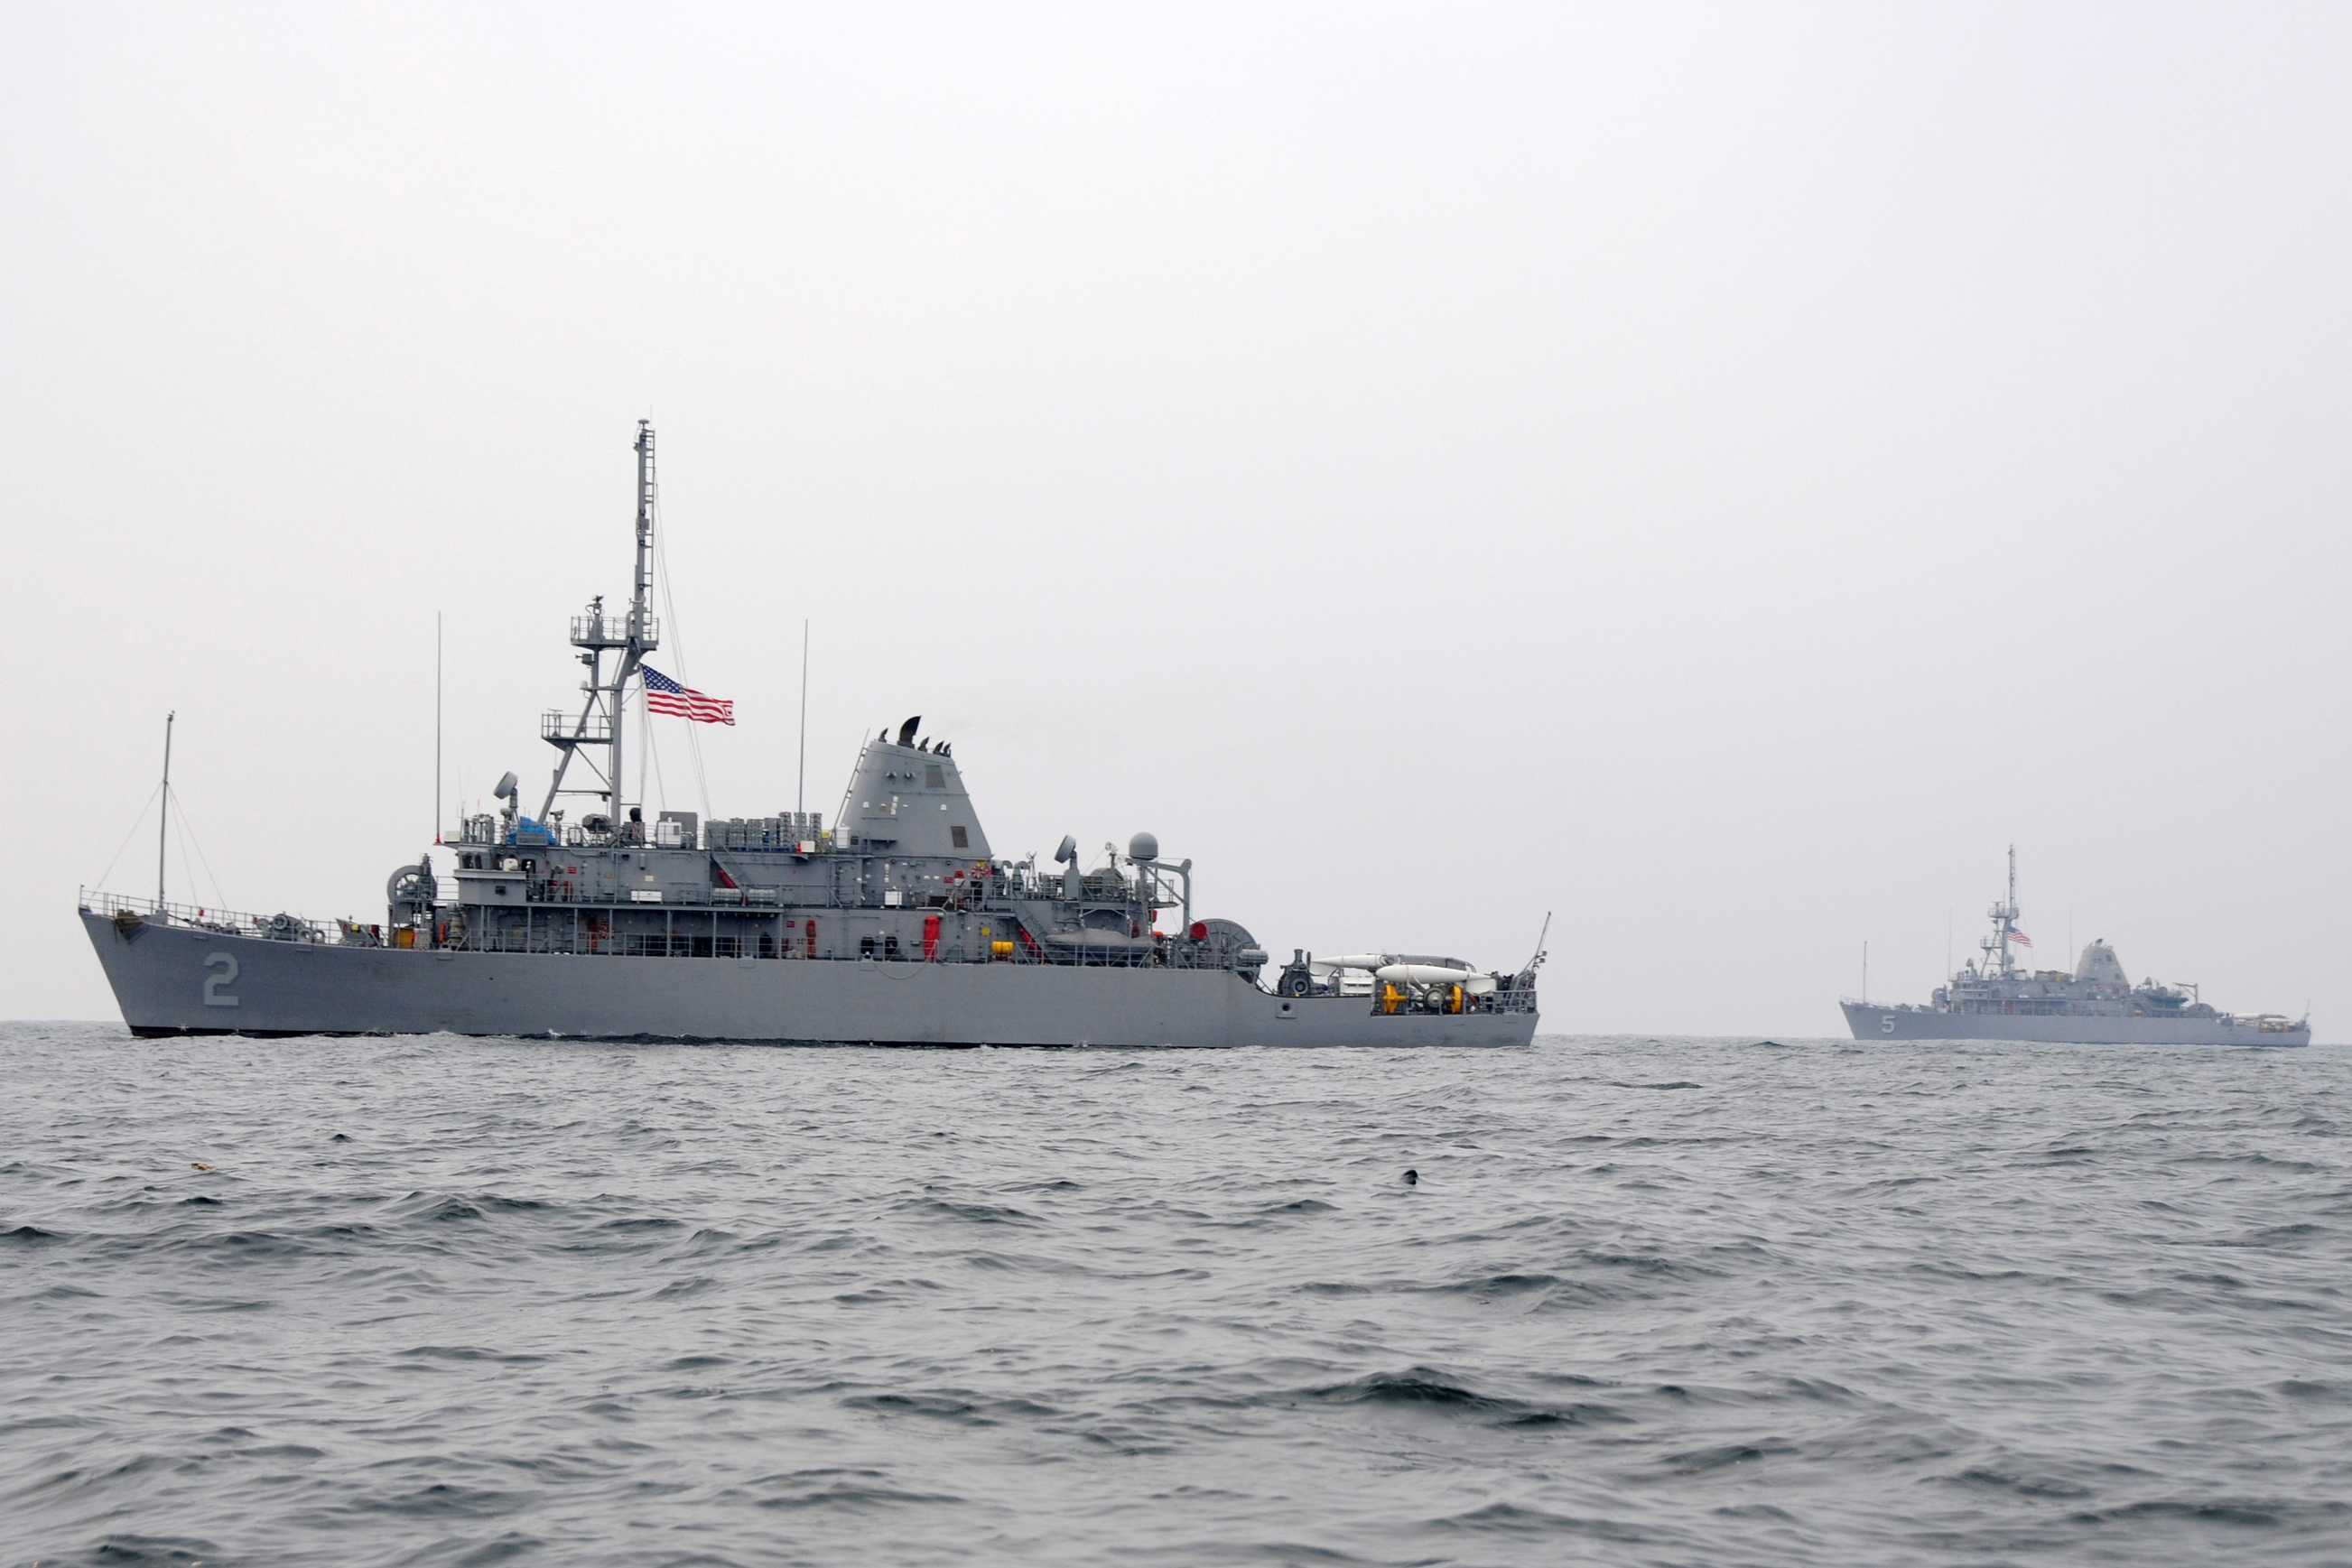 http://upload.wikimedia.org/wikipedia/commons/e/ef/US_Navy_091126-N-8335D-114_The_mine_countermeasures_ships_USS_Defender_(MCM_2)_and_USS_Guardian_(MCM_5)_are_underway_in_the_Yellow_Sea.jpg